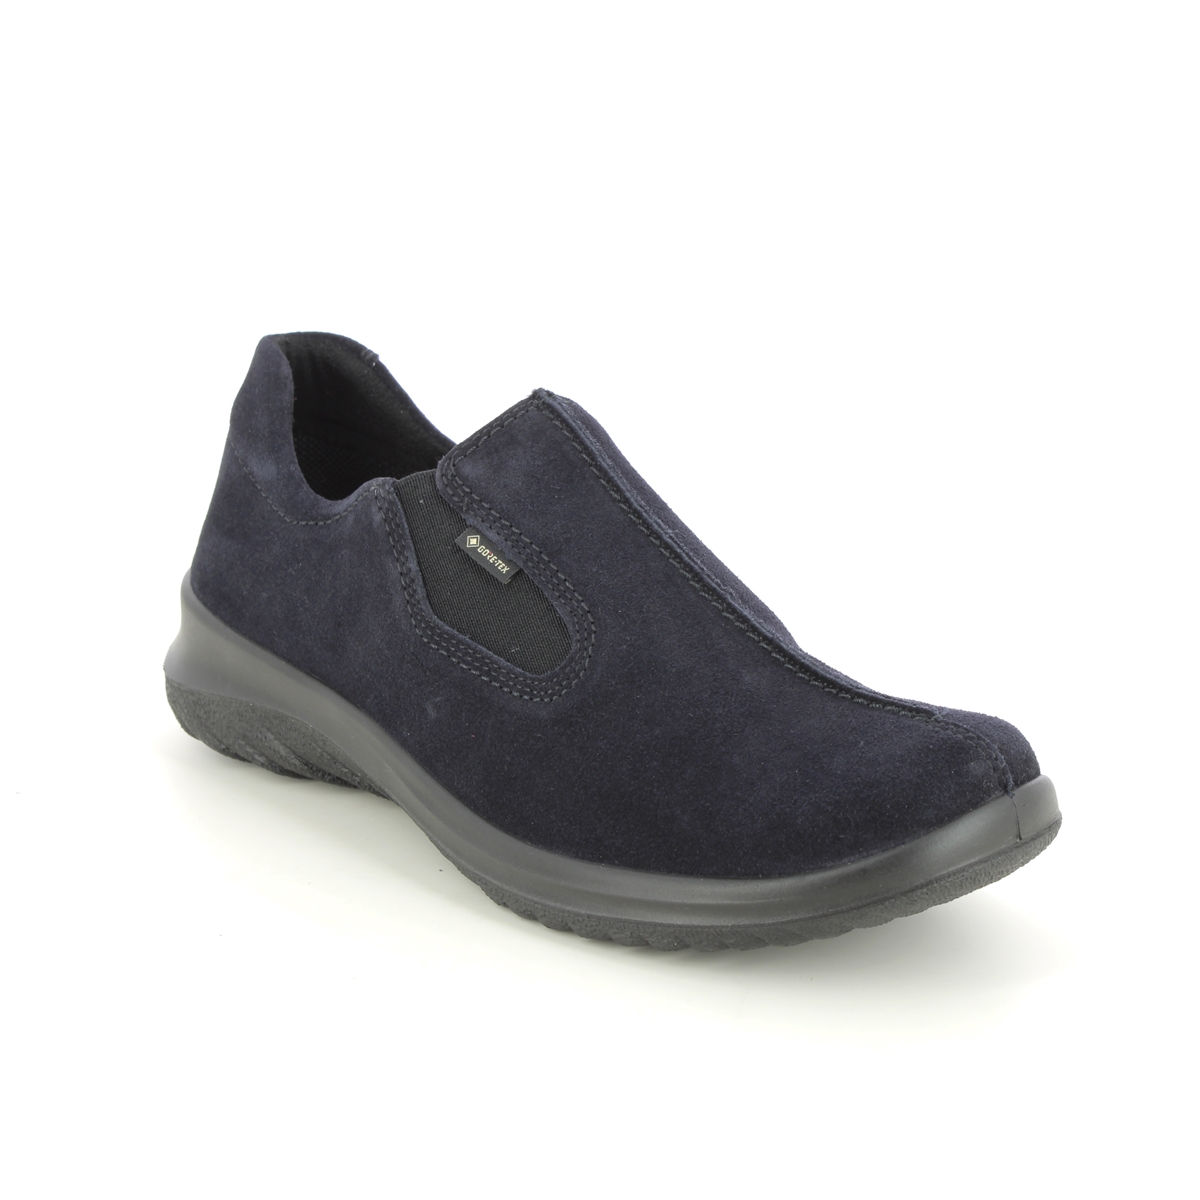 Legero Soft Shoe Gtx Navy Suede Womens Comfort Slip On Shoes 09568-80 In Size 8 In Plain Navy Suede